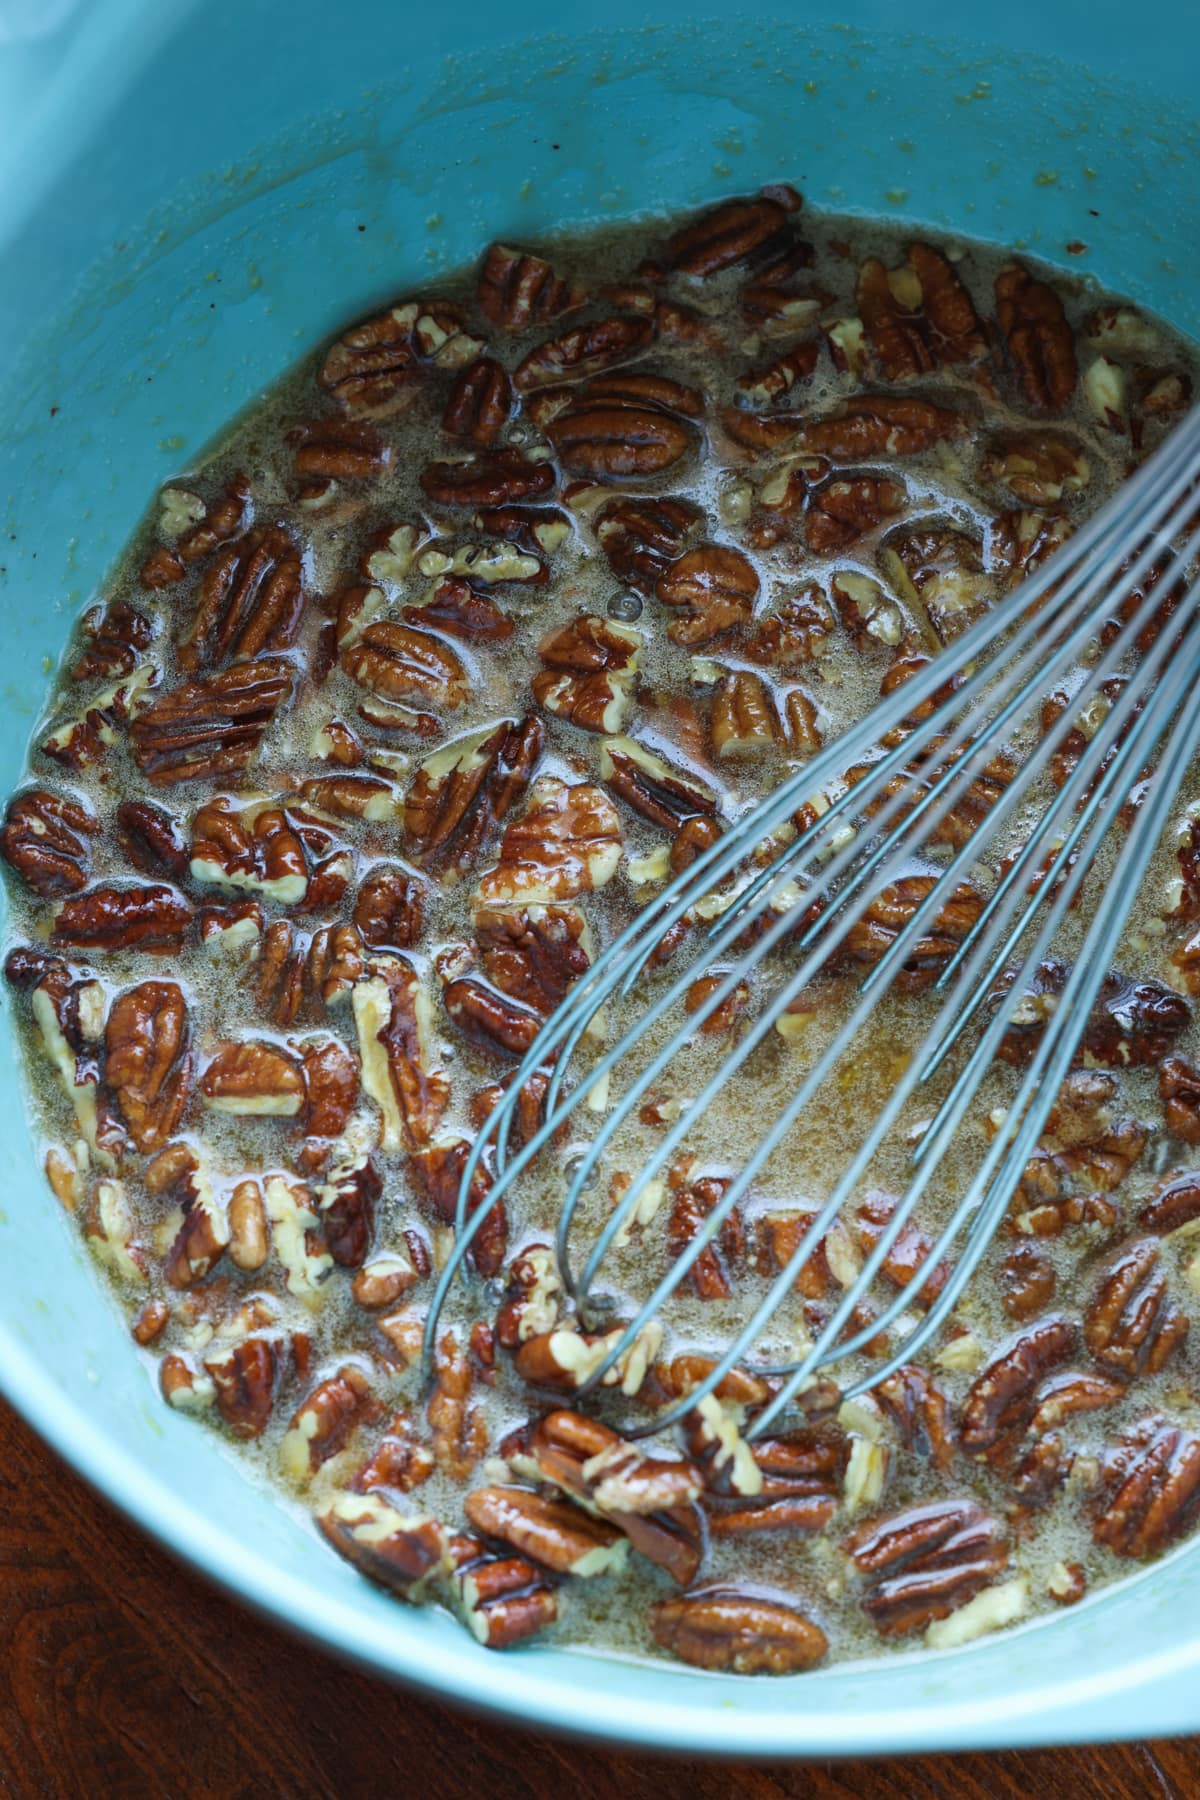 Pecan tart mixture in a blue bowl with a whisk